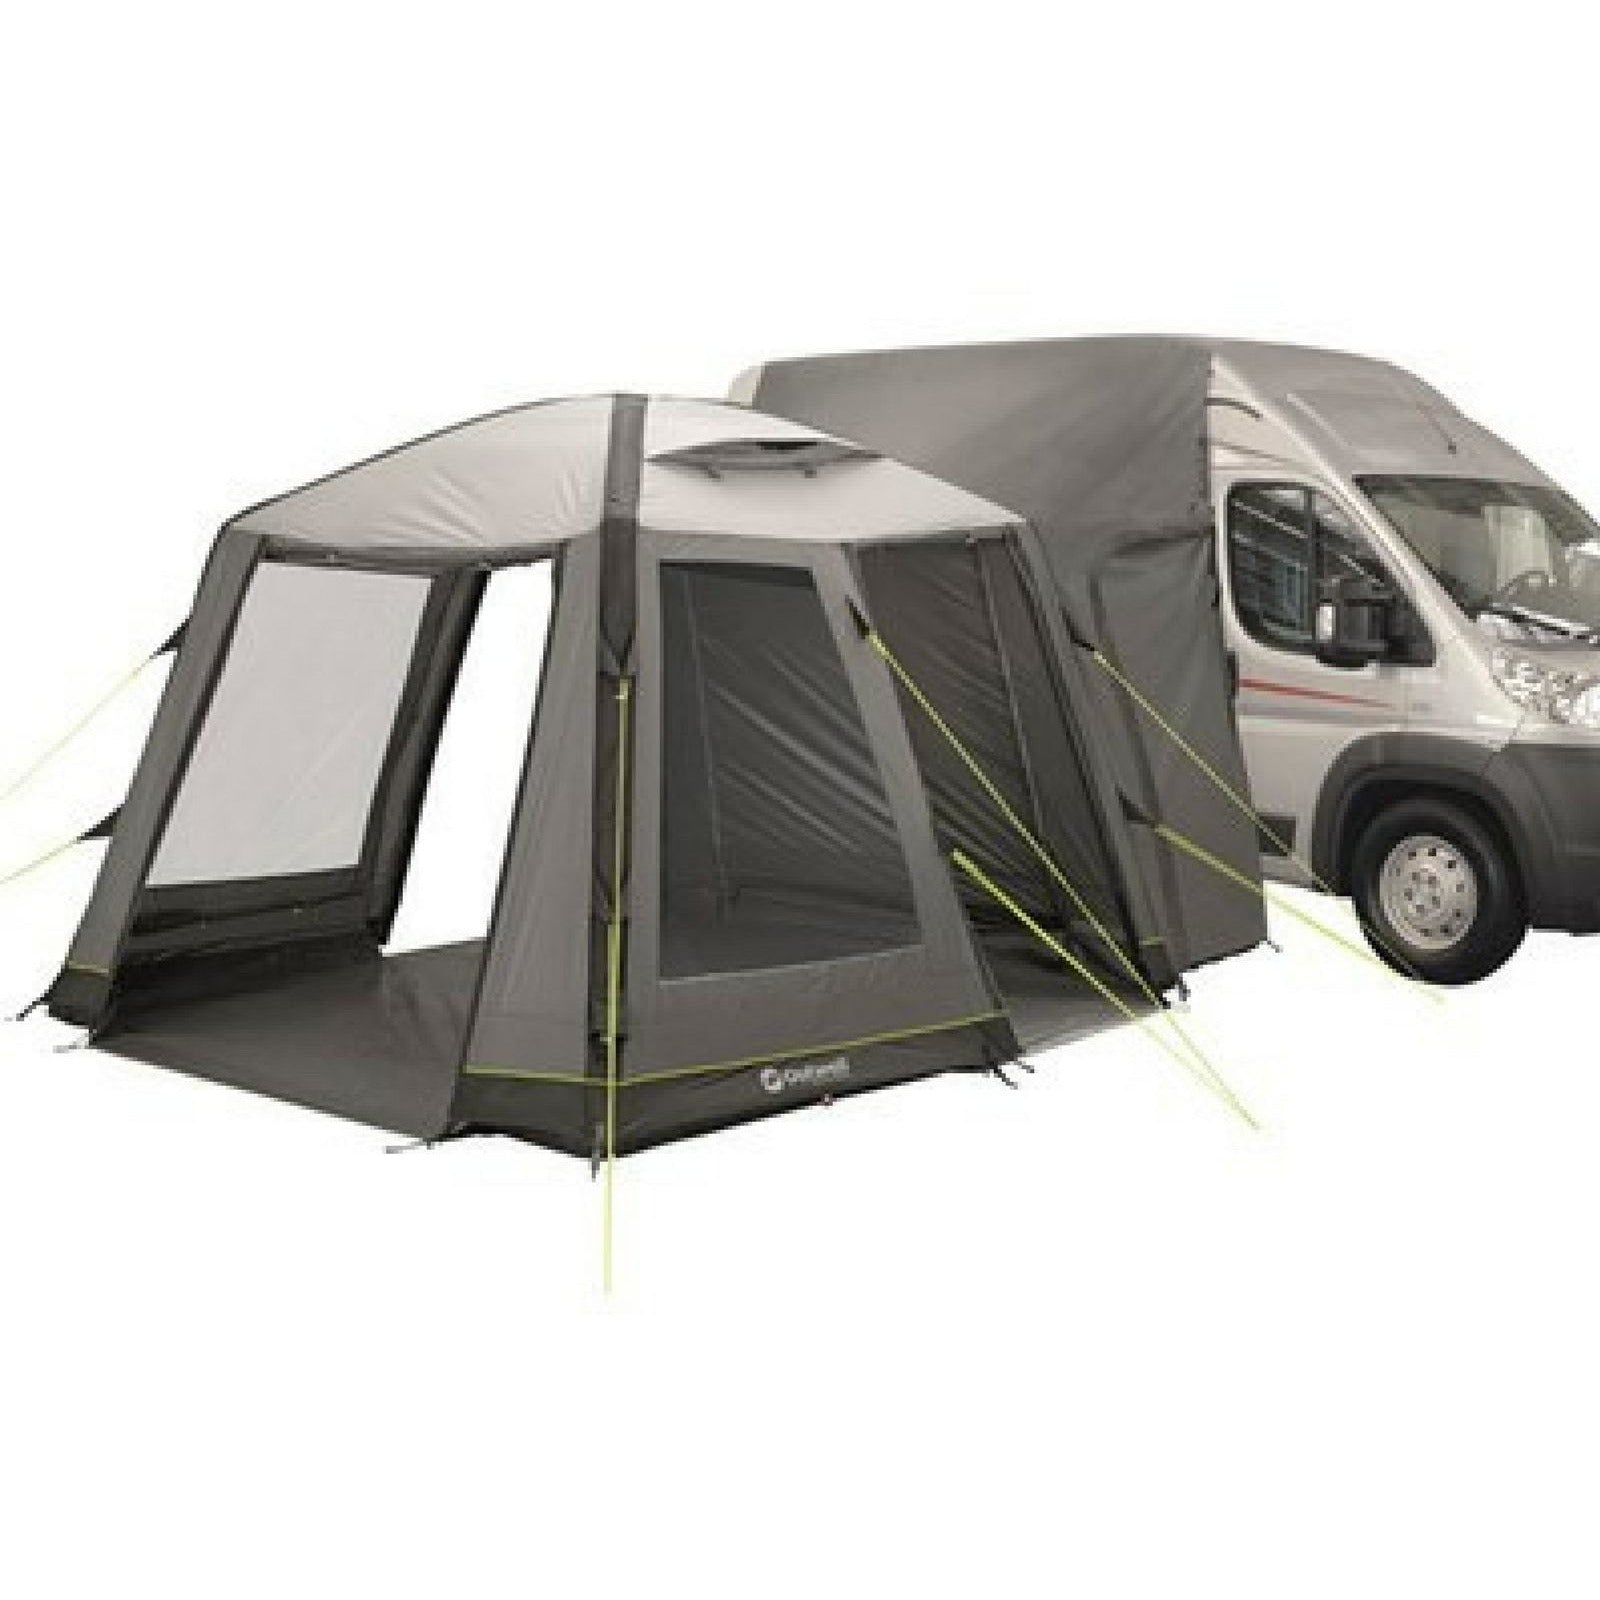 Outwell Daytona Air Tall Driveaway Awning (2018 Edition) - Quality Caravan Awnings